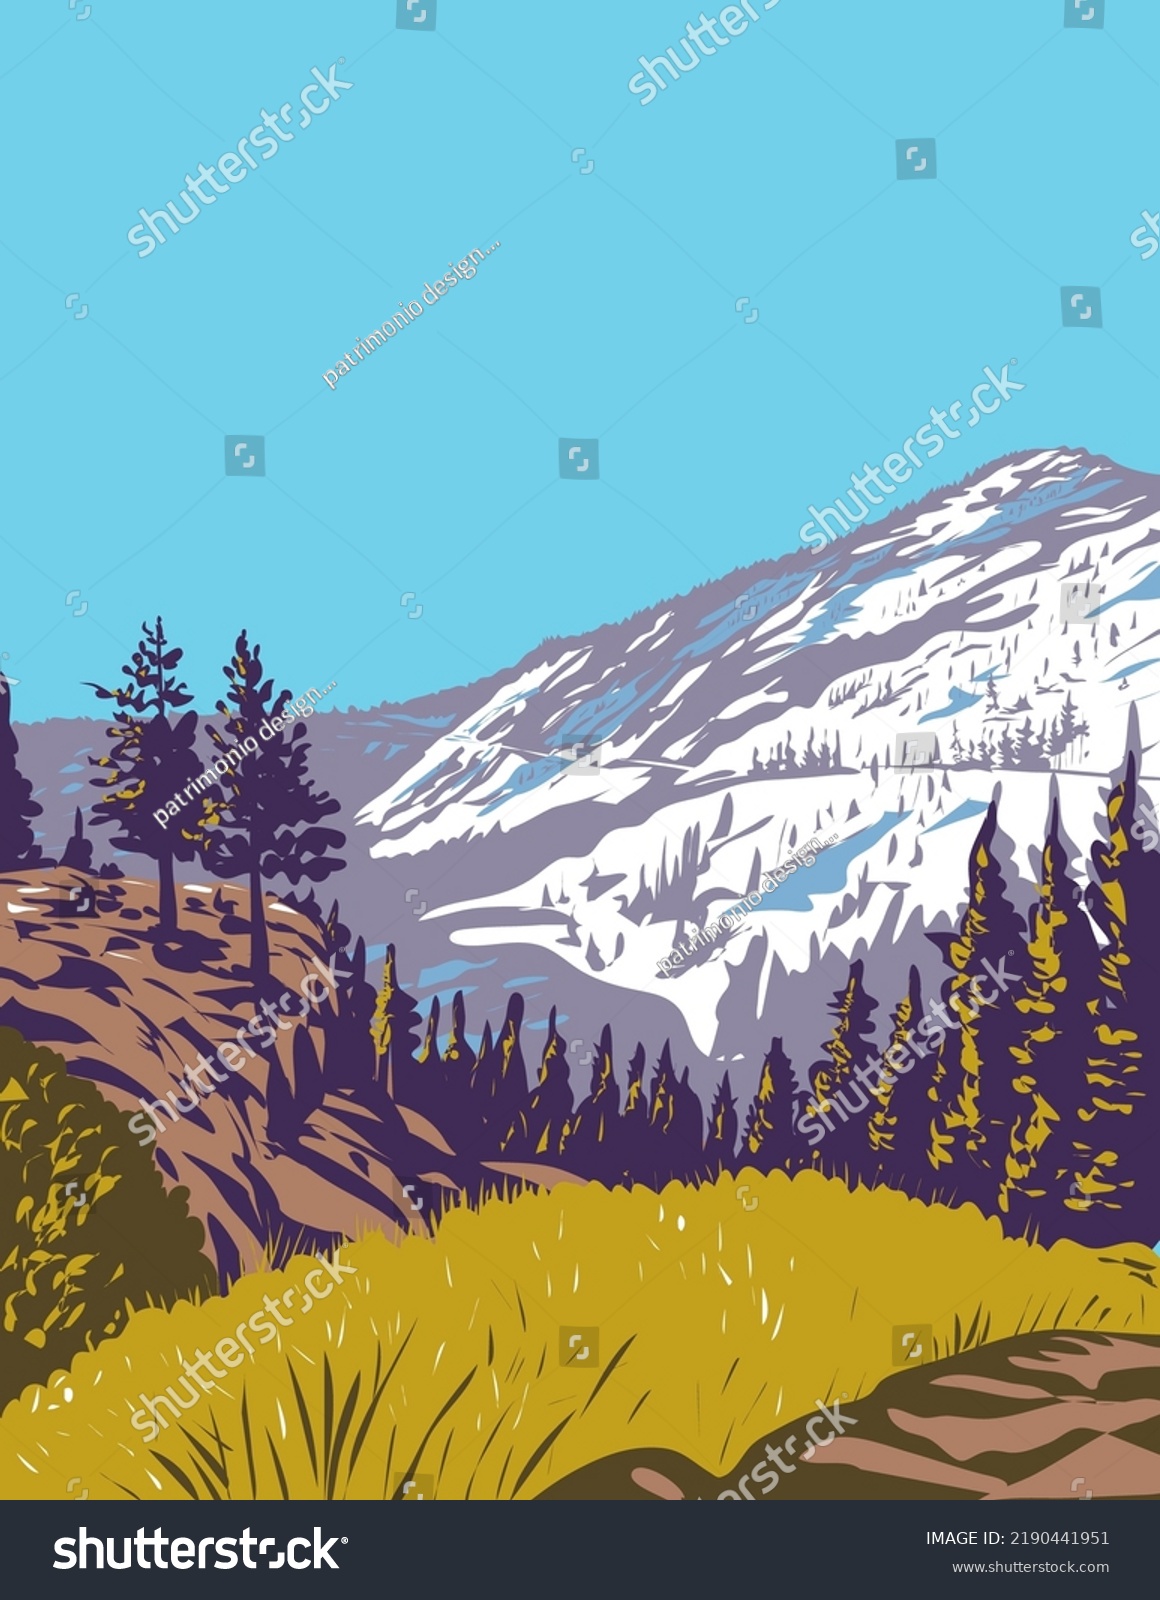 SVG of WPA poster art of Phipps Peak in the Sierra Nevada west of Emerald Bay and Lake Tahoe in El Dorado County and the Desolation Wilderness, California, USA done in works project administration style. svg